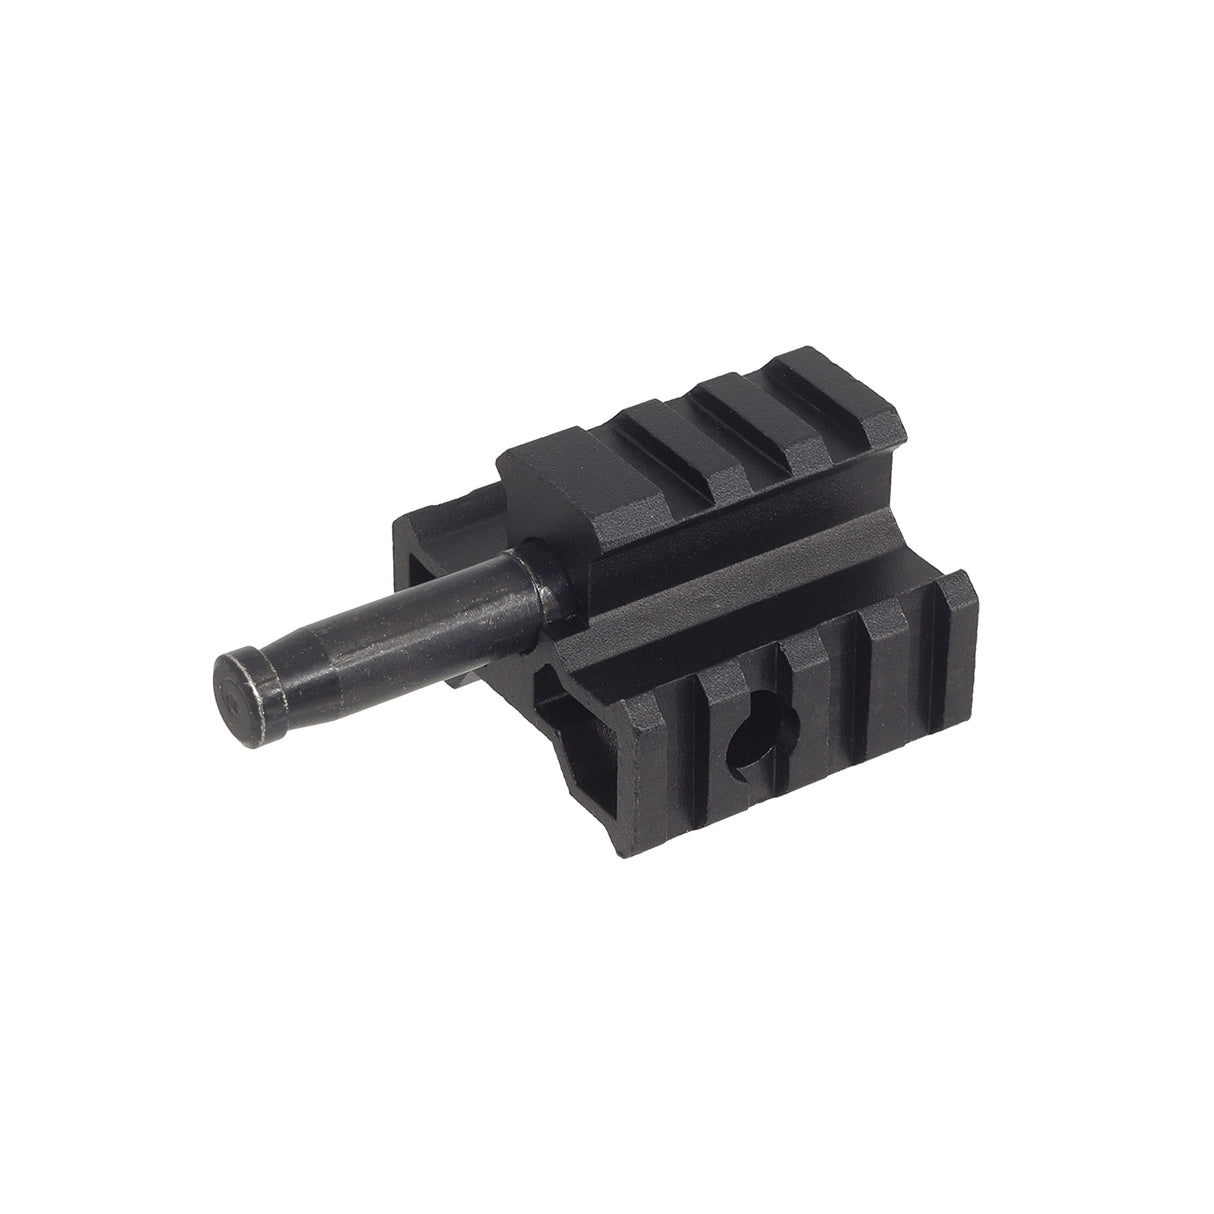 WELL Railed Bipod Adapter for L96 Series ( WELL-AC006 )